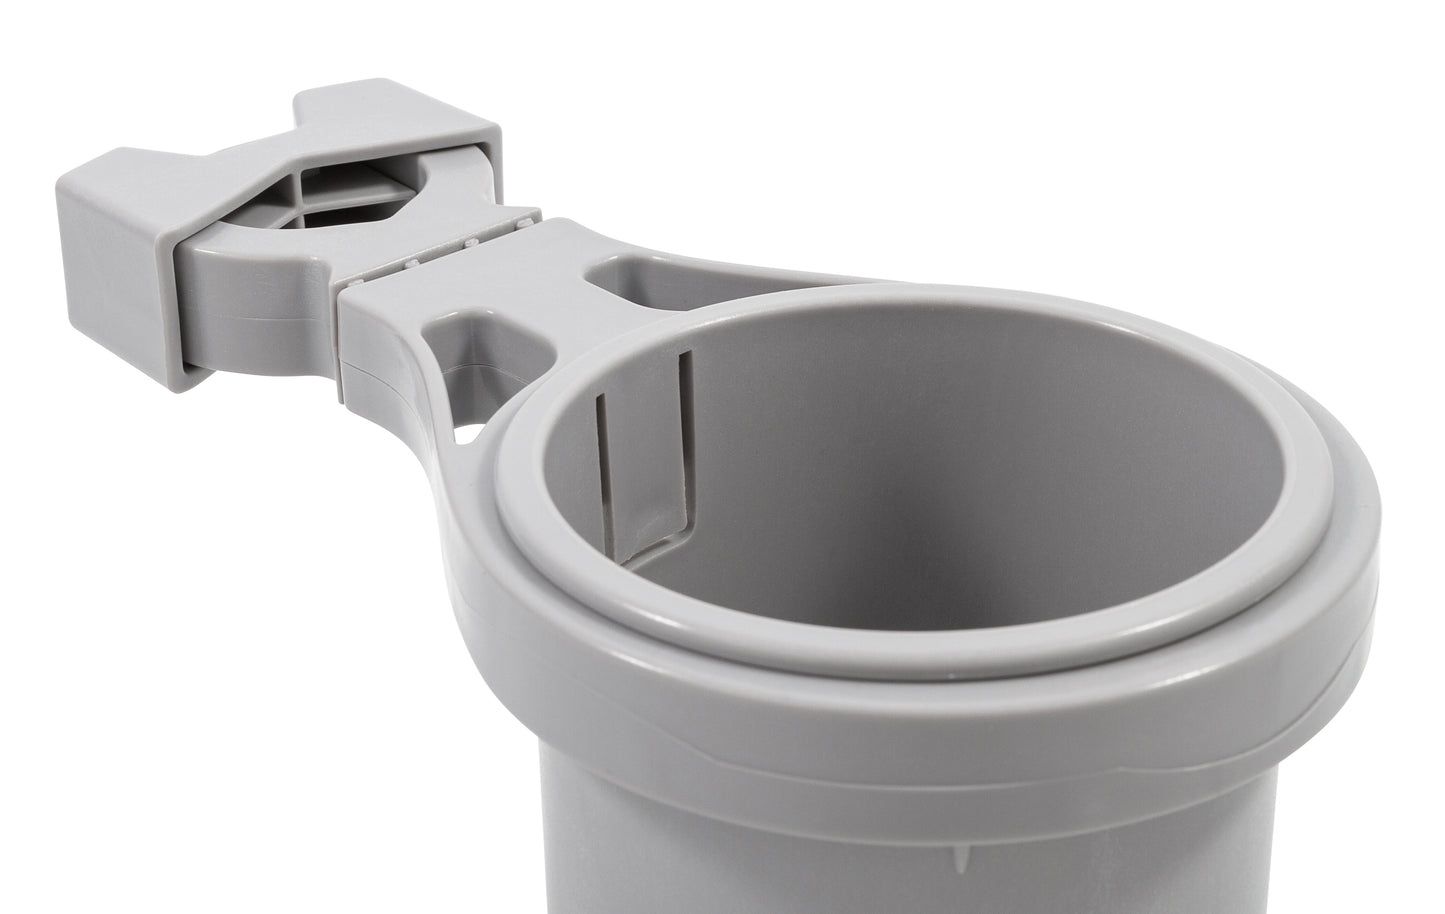 Camco Large Rail Mounted Boat Cup Holder - Gray